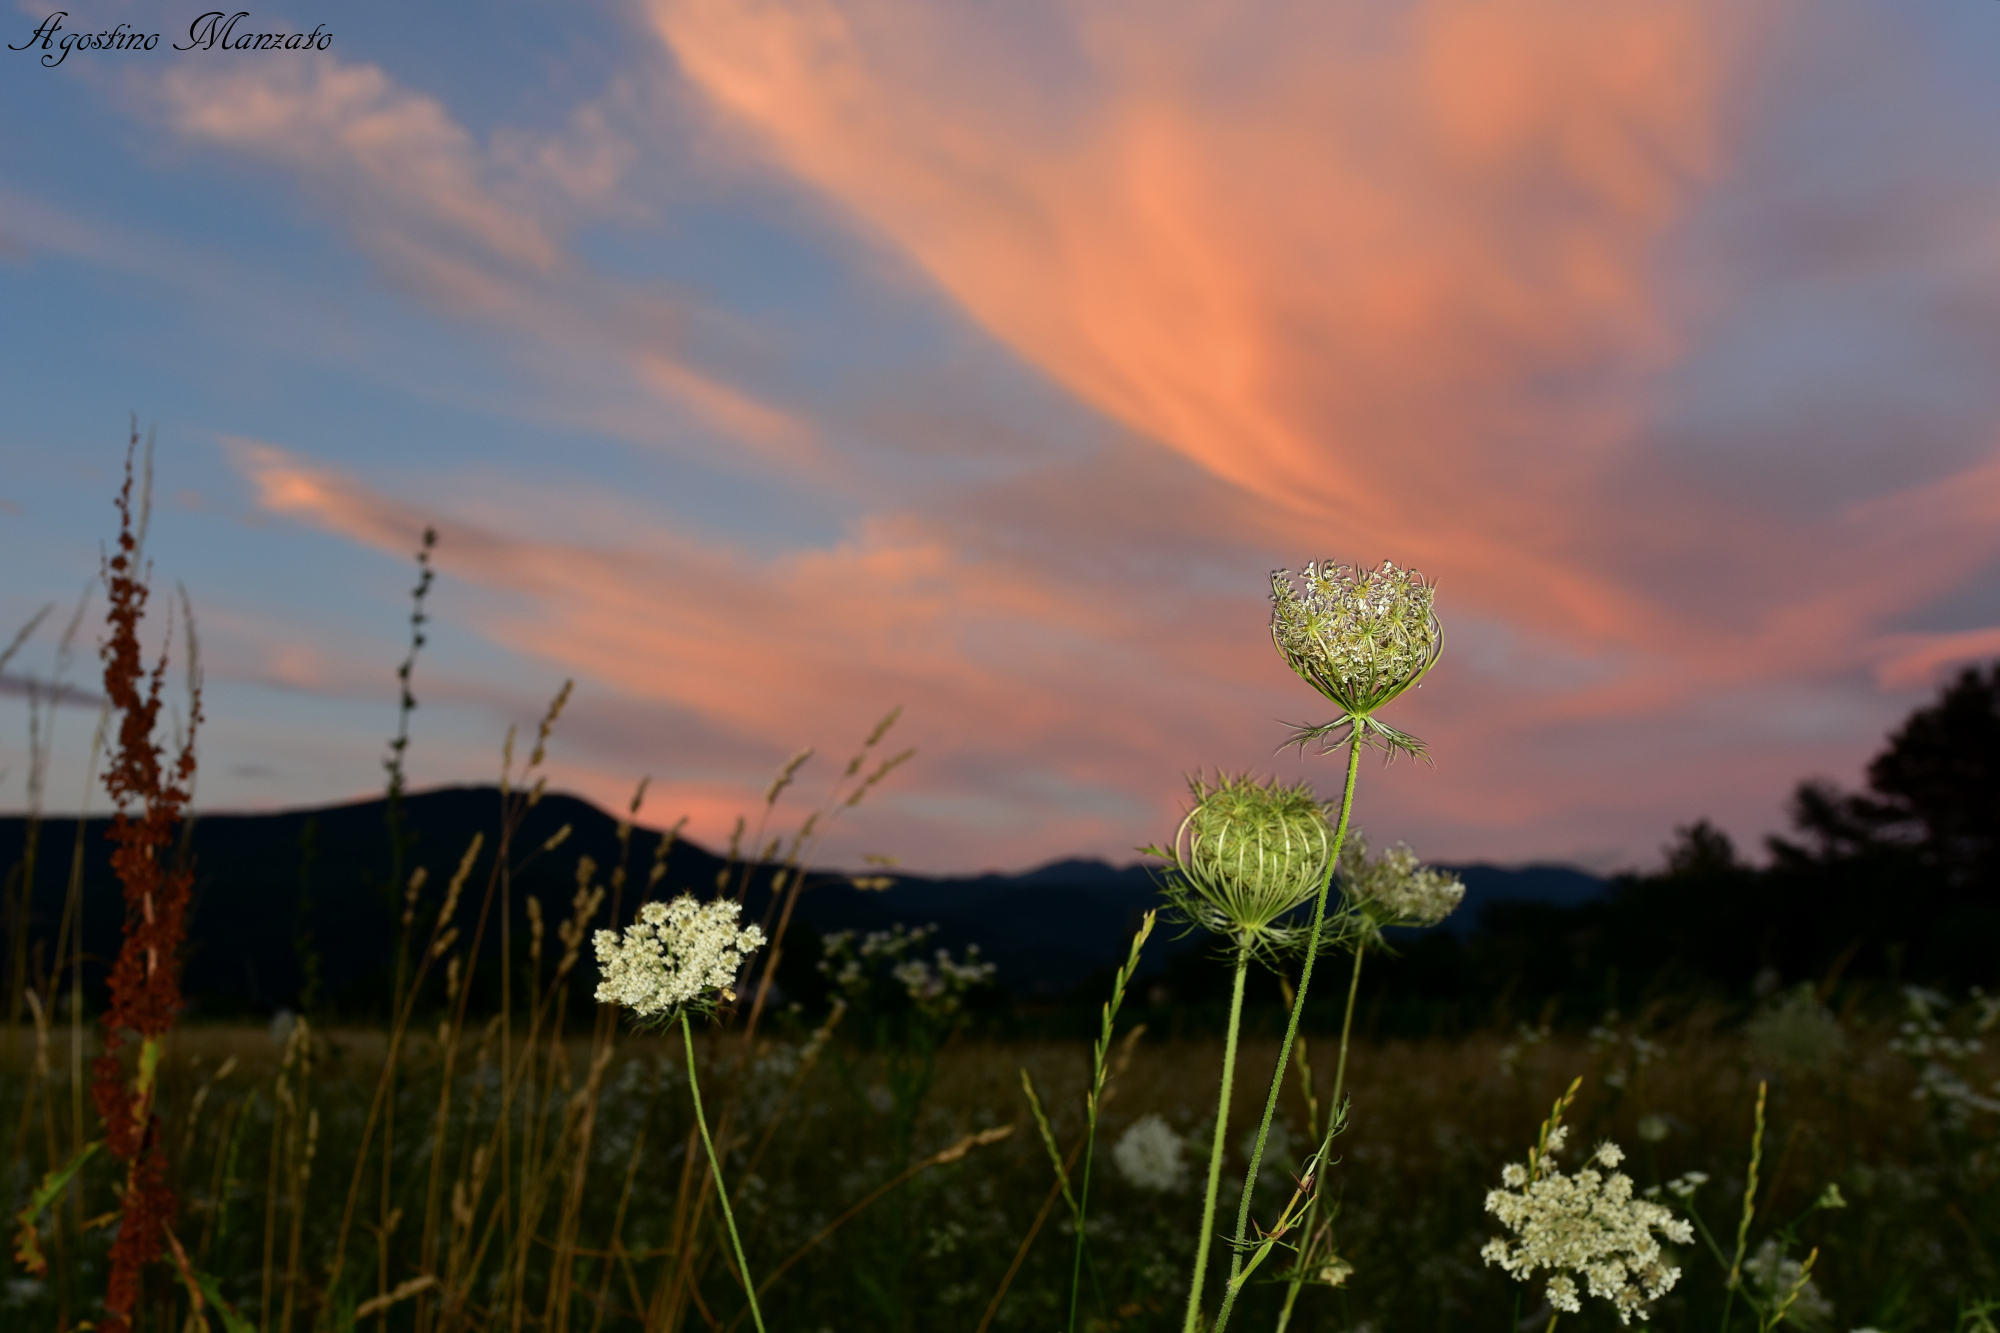 Field flowers at sunset...